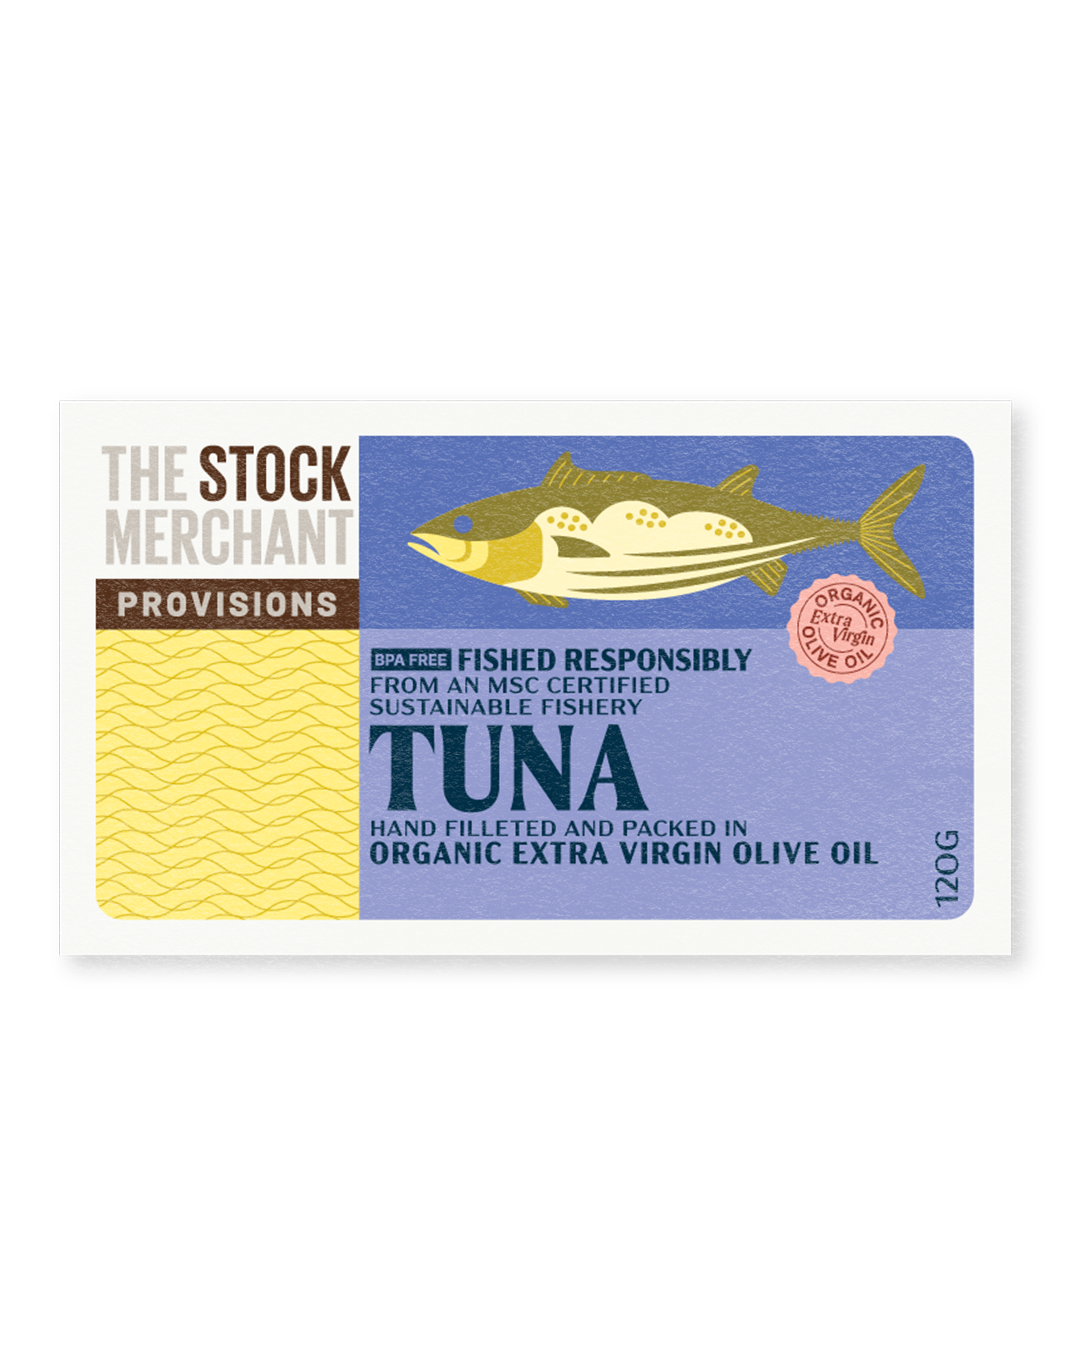 Canned Provisions - Responsibly Caught Tuna